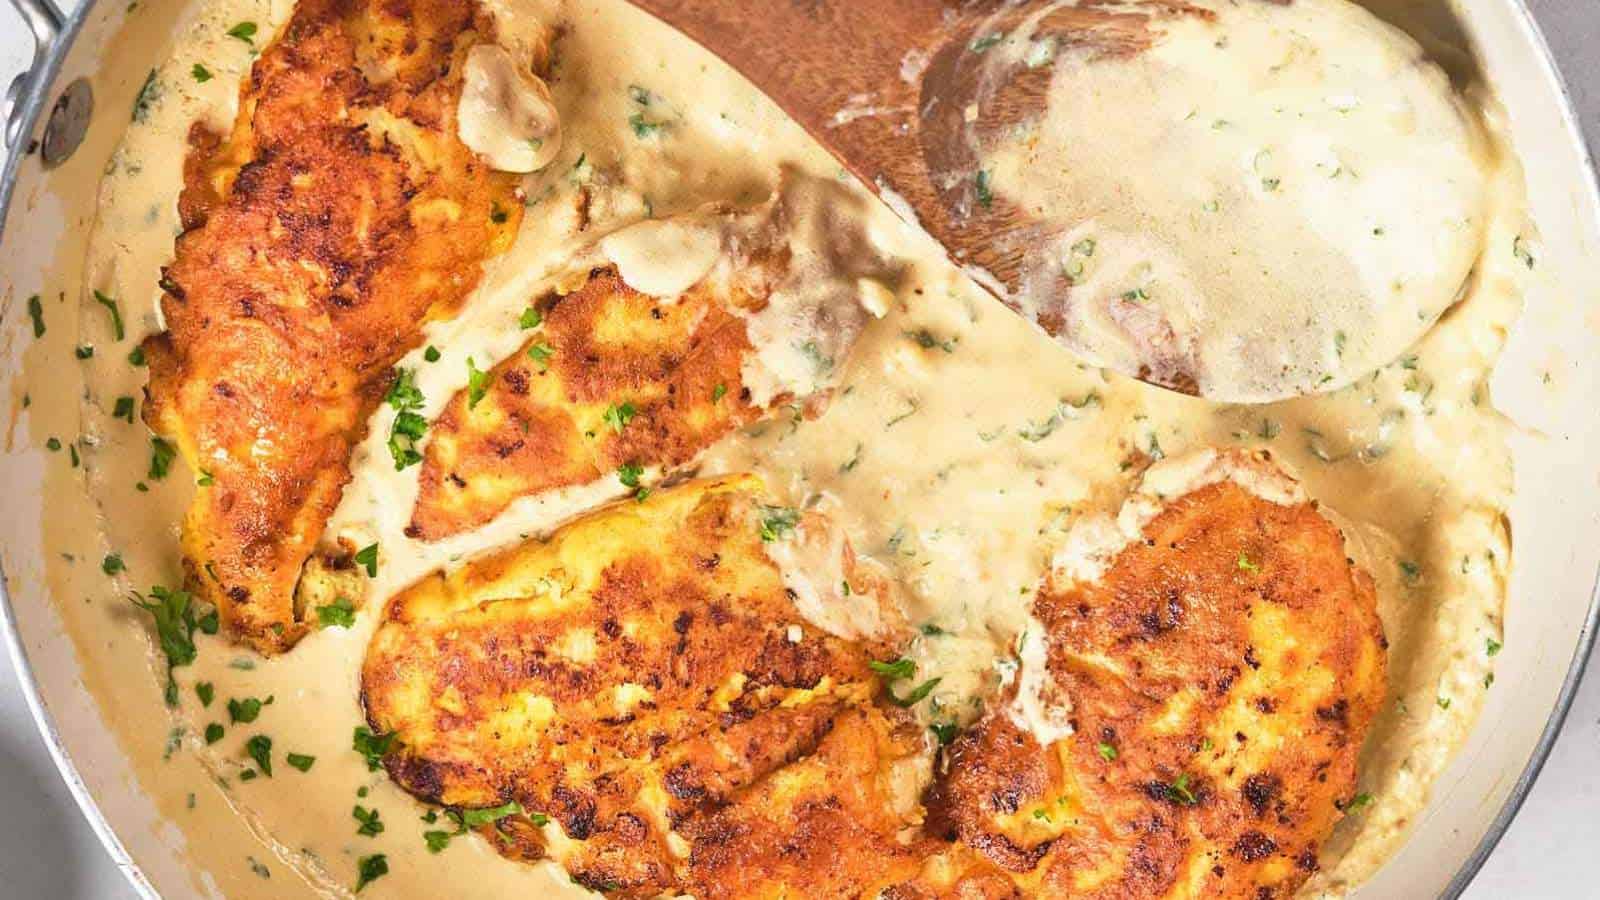 Pan with four browned chicken breasts in a creamy sauce, garnished.